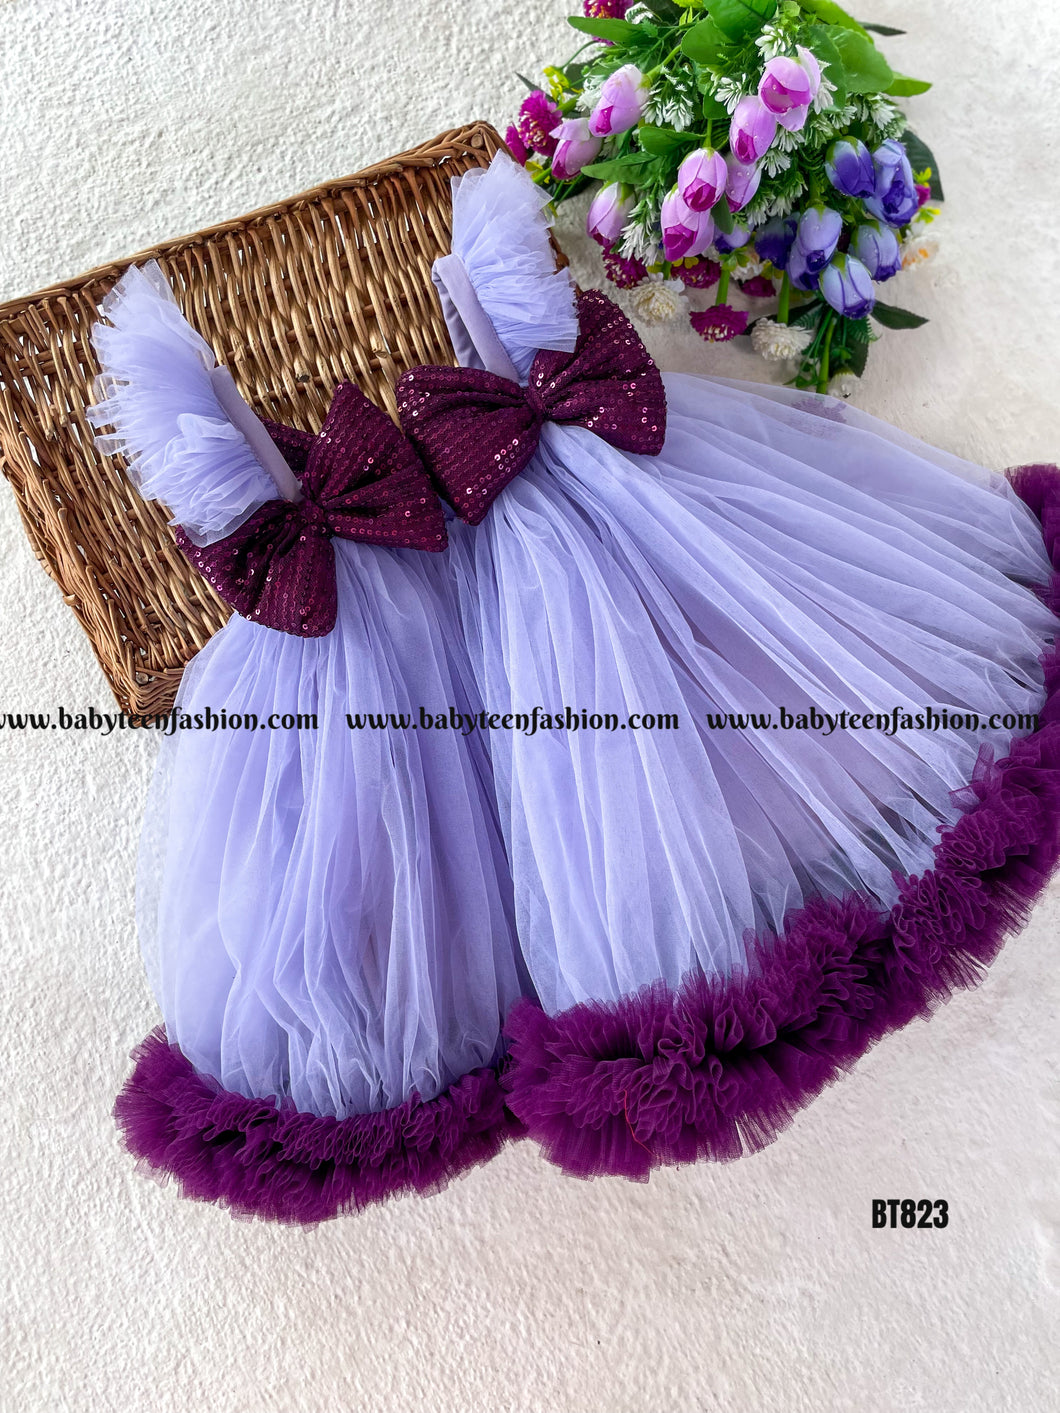 BT823 Semi Partywear Double Bow Frock with Ruffle